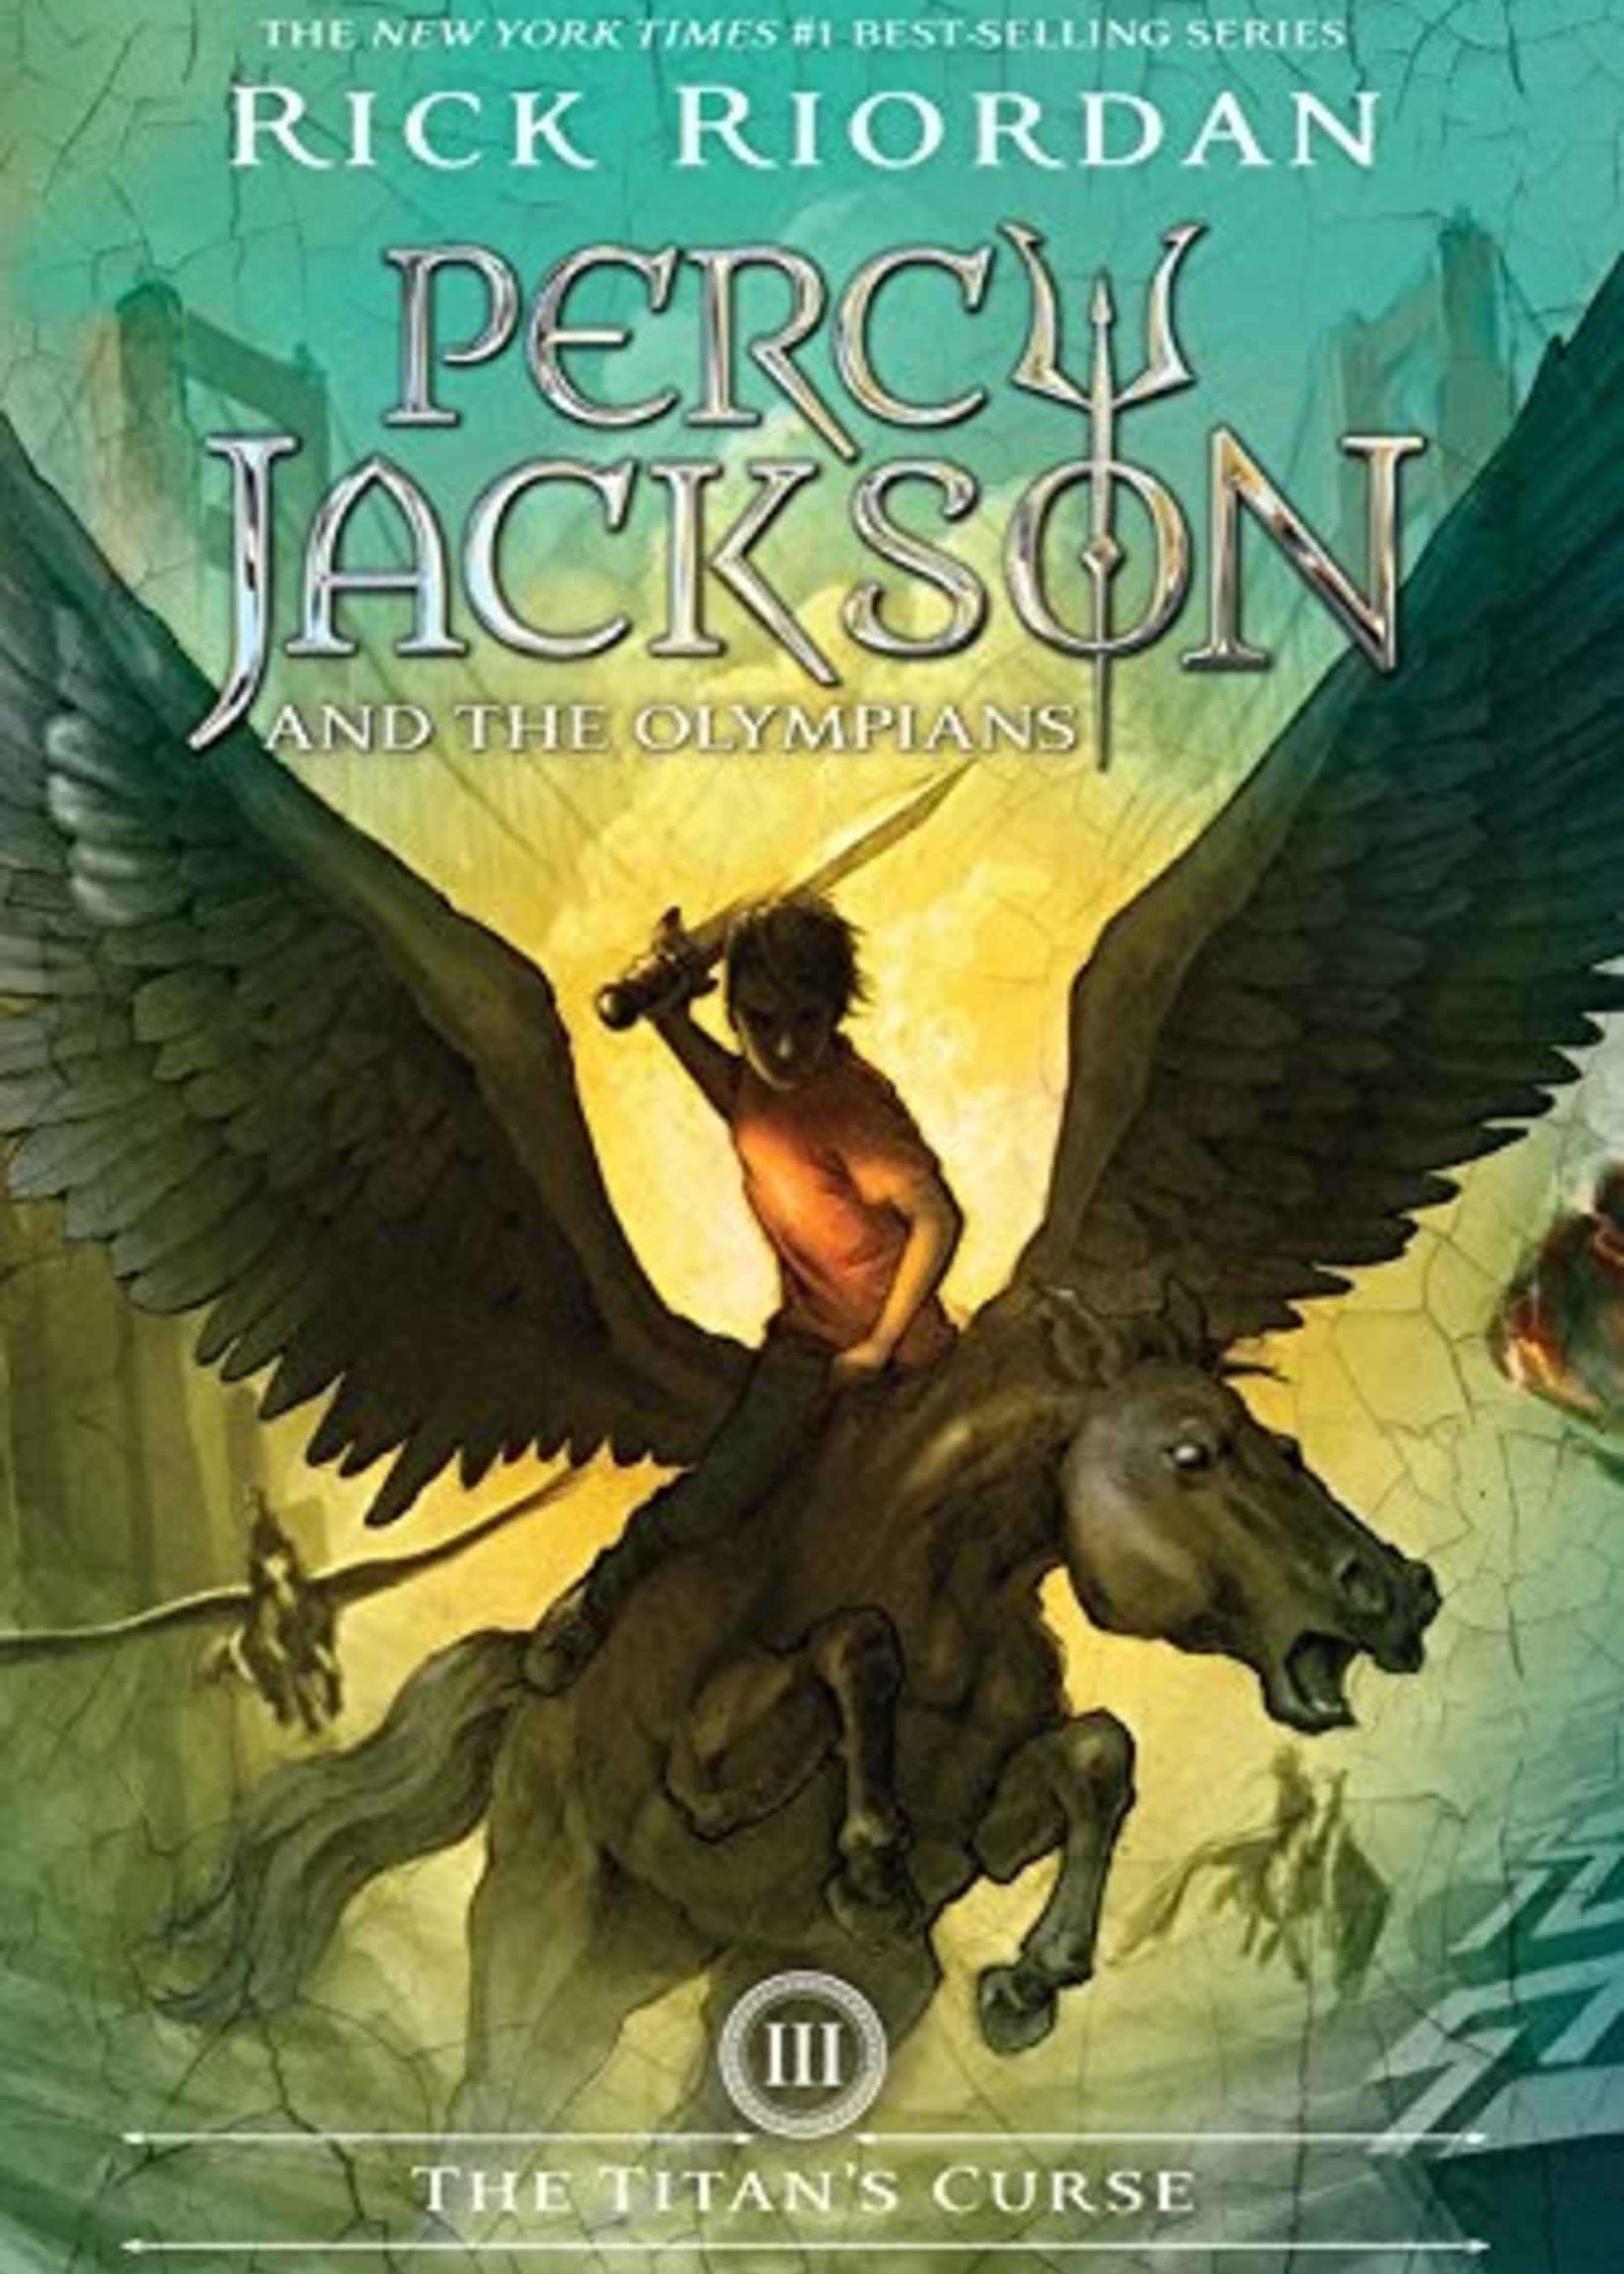 Percy Jackson and the Olympians #03, The Titan's Curse - Paperback